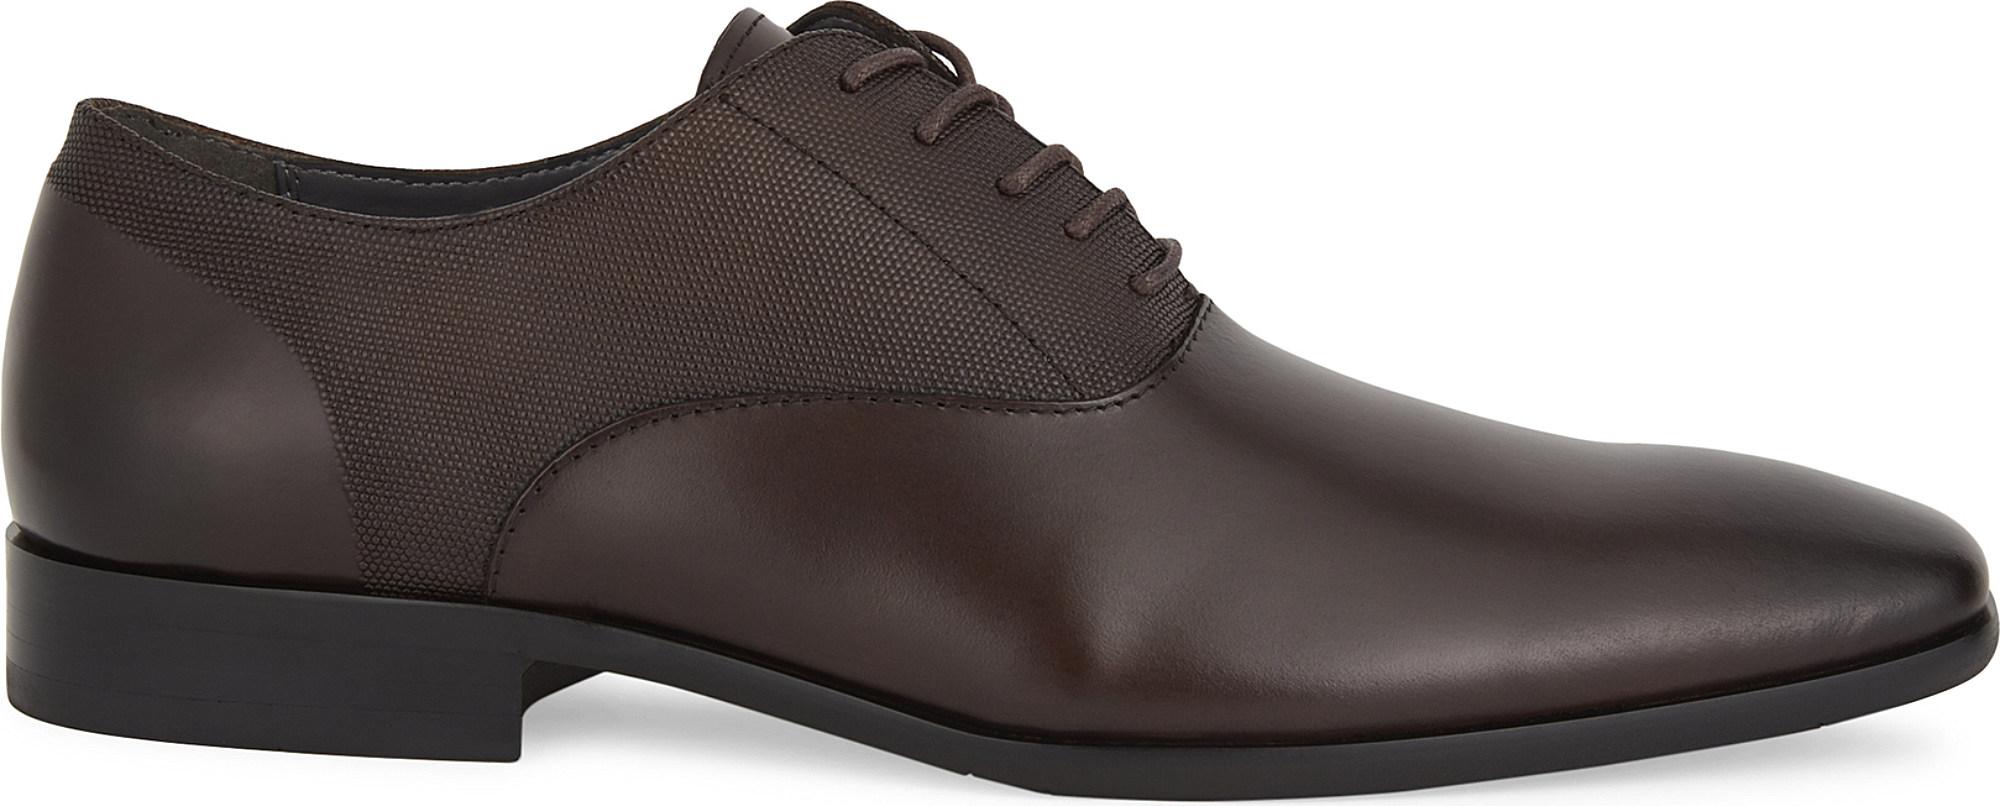 ALDO Piccadilly Leather Oxford Shoes in Dark Brown (Brown) for Men - Lyst